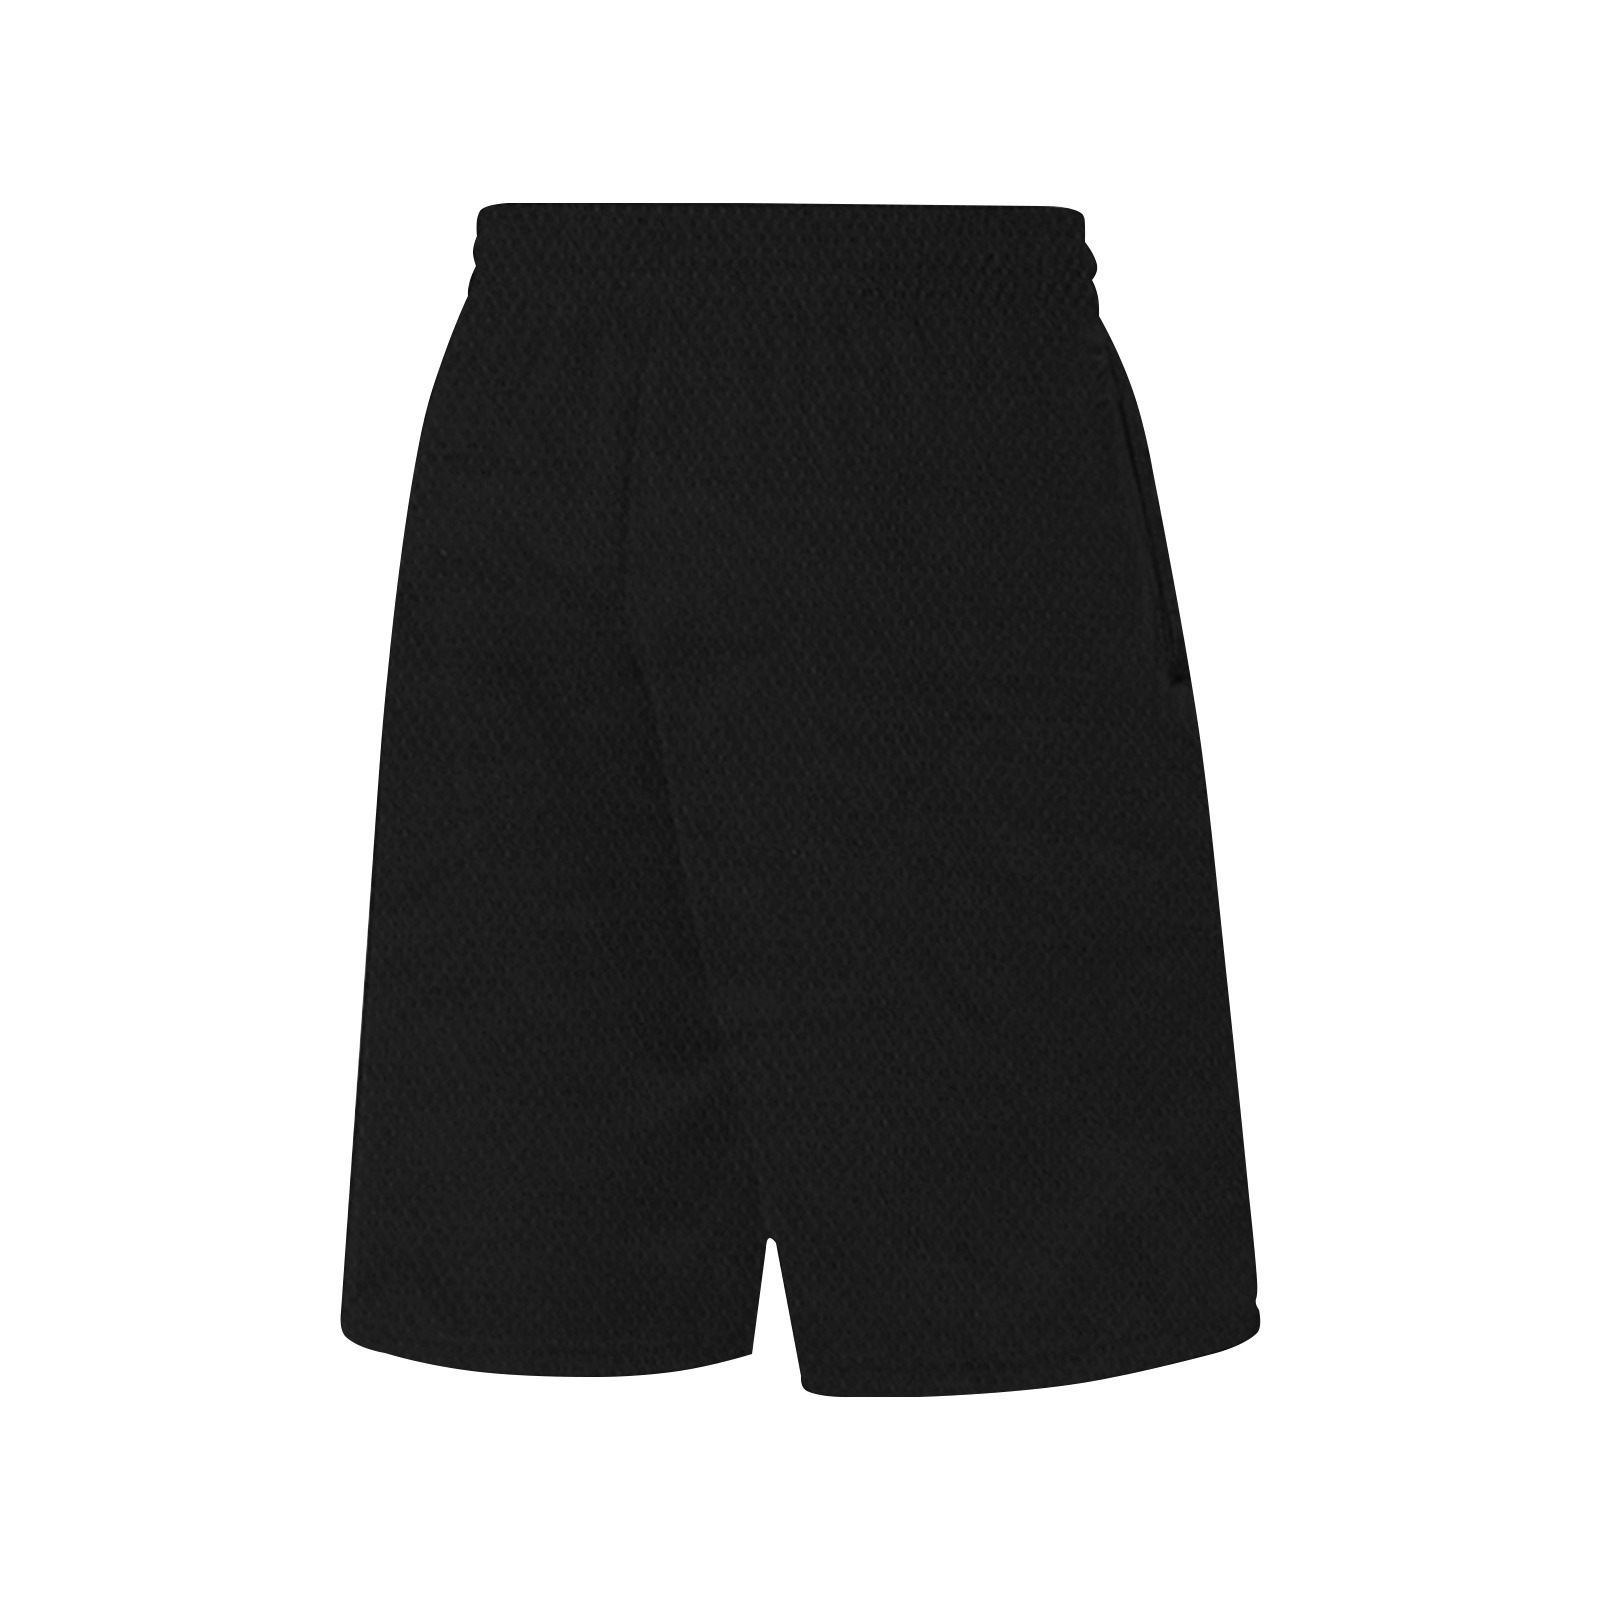 black All Over Print Basketball Shorts with Pocket